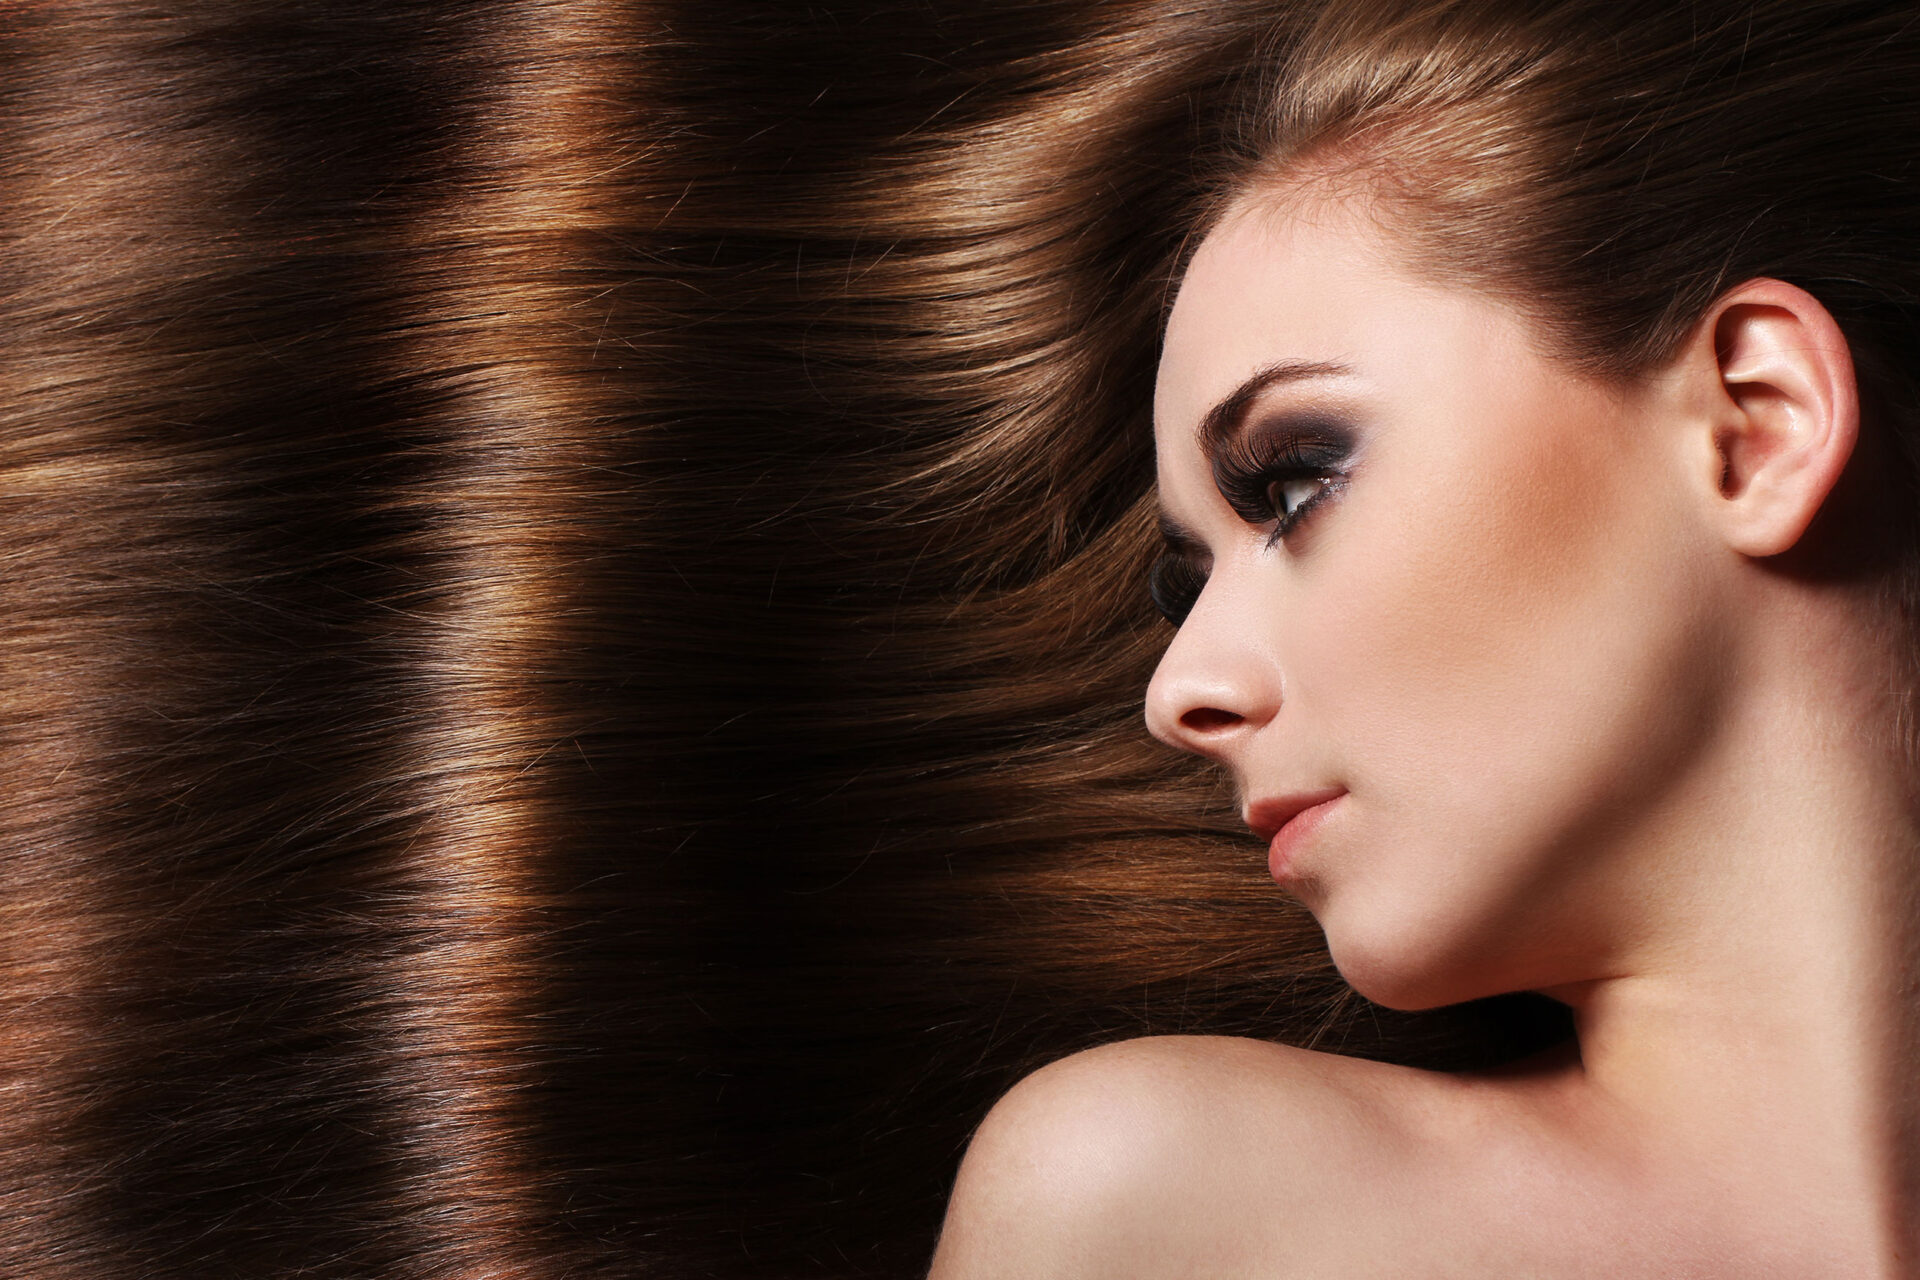 The best hair salon near me in Haircuts, Hair Color, Styling, Keratin Treatments, Extensions, and more!